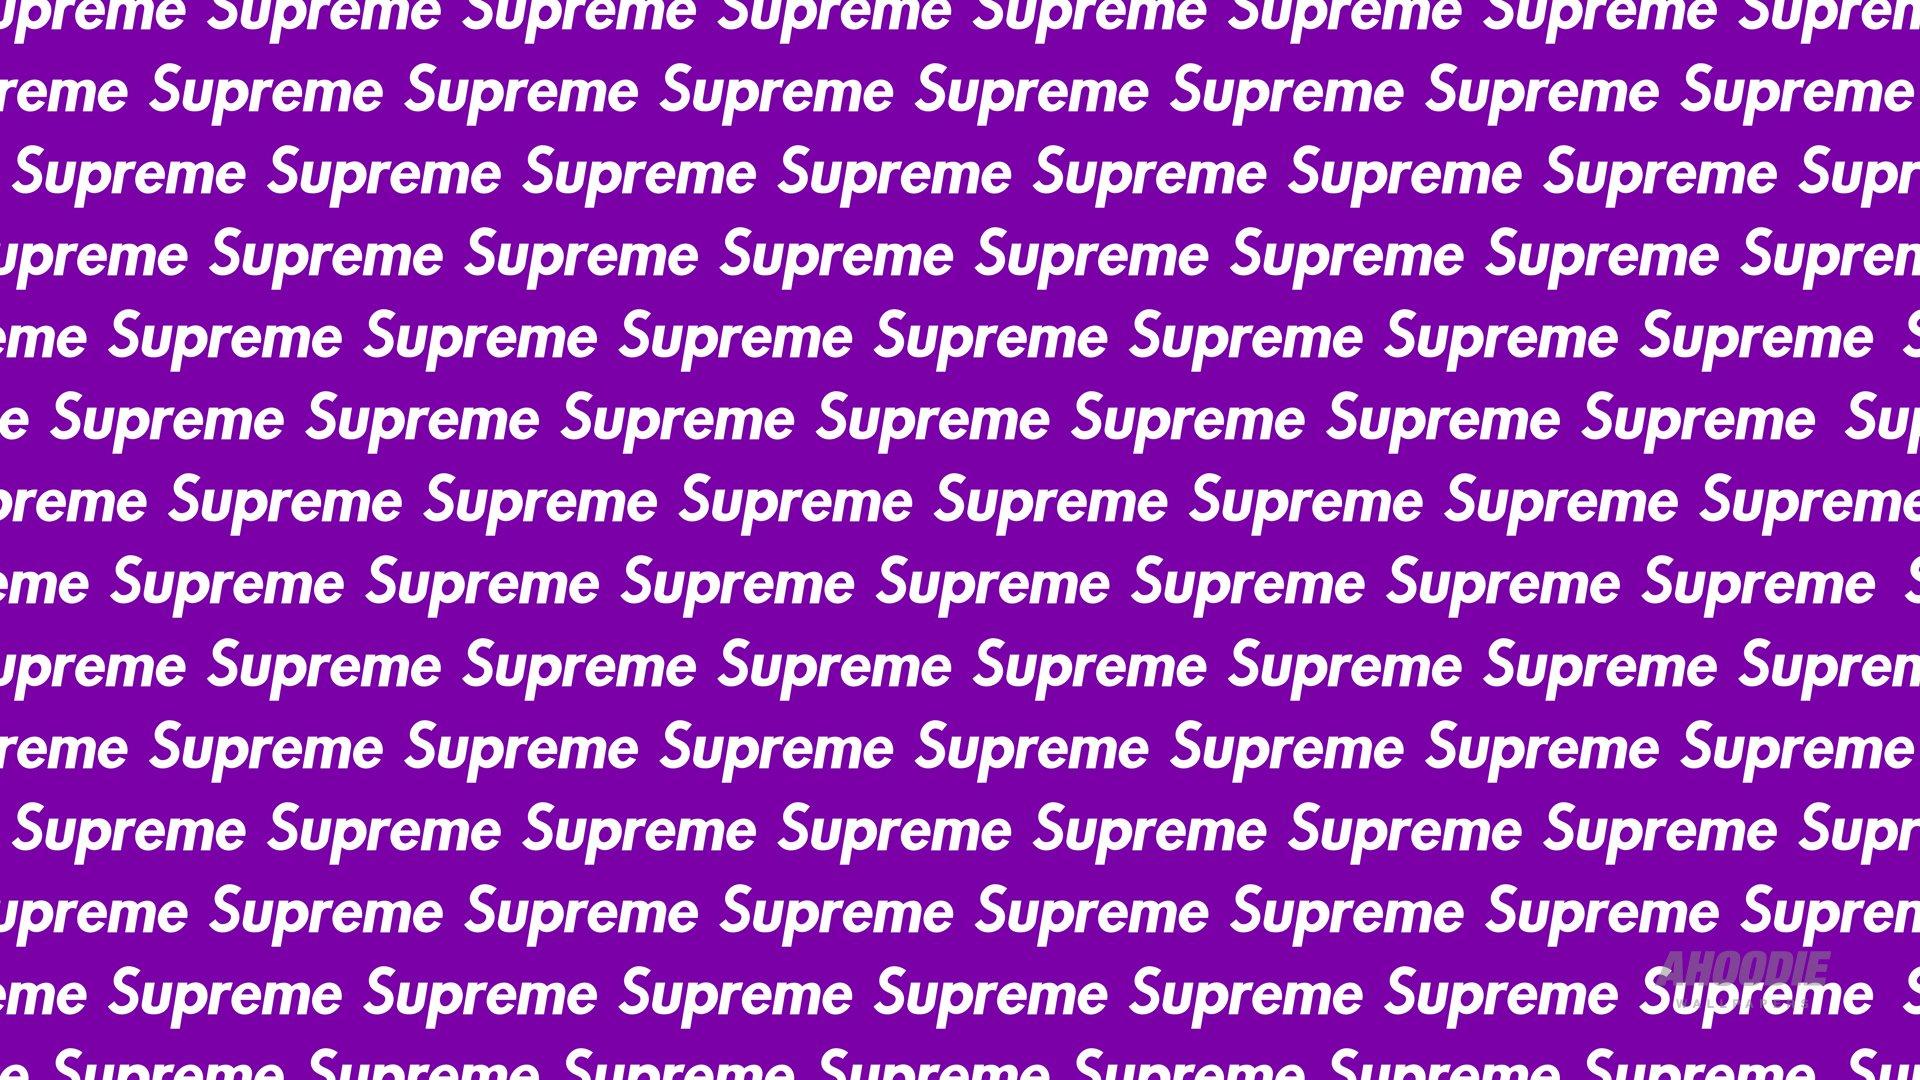 Supreme Image and Wallpaper for Mac, PC